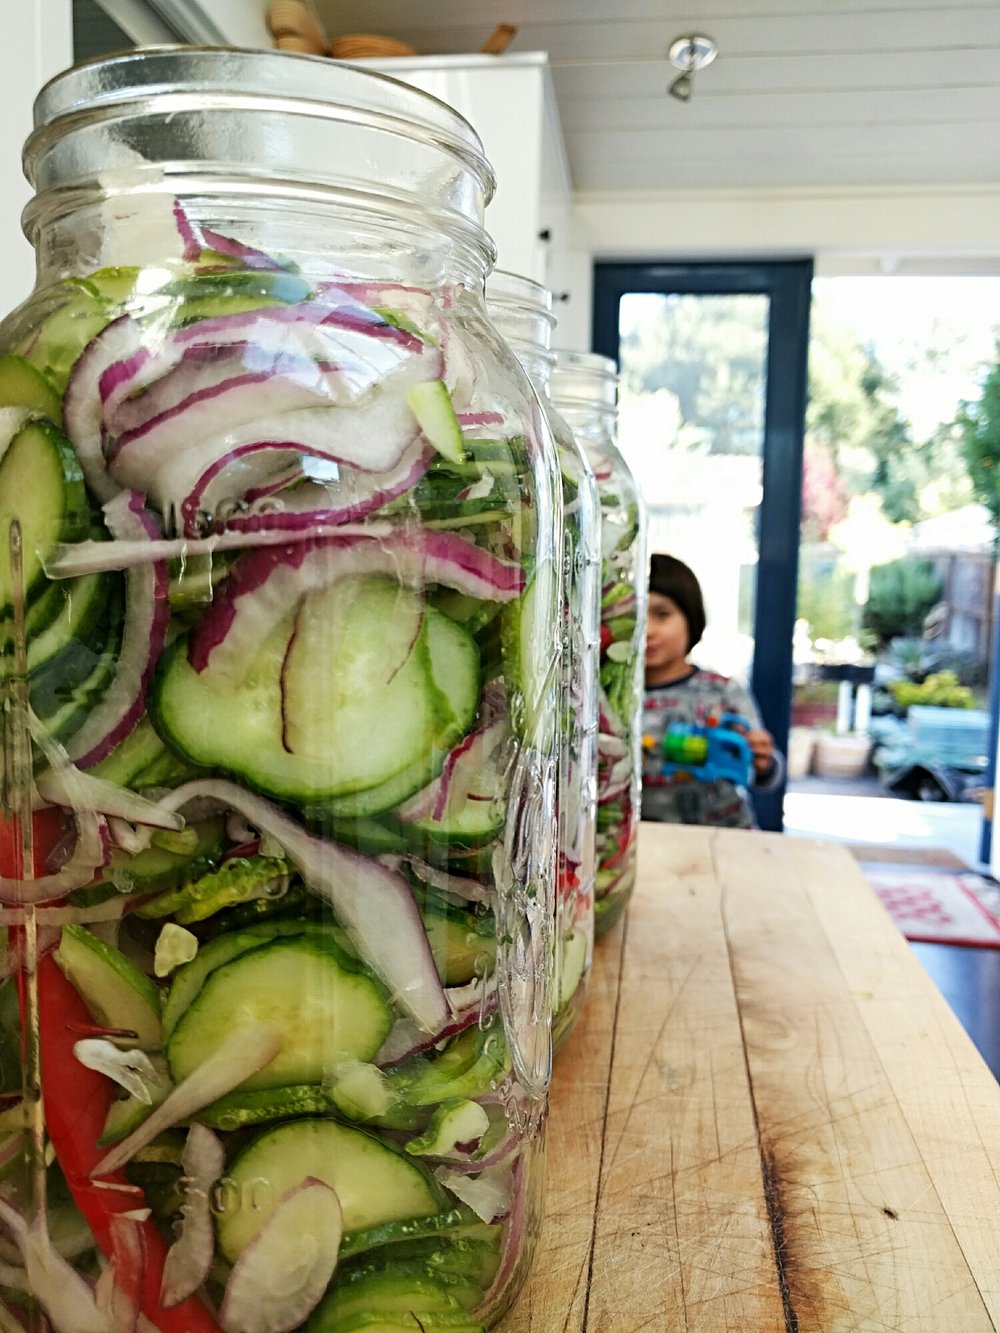 Sliced cucumber mixture just before pouring brine into jars